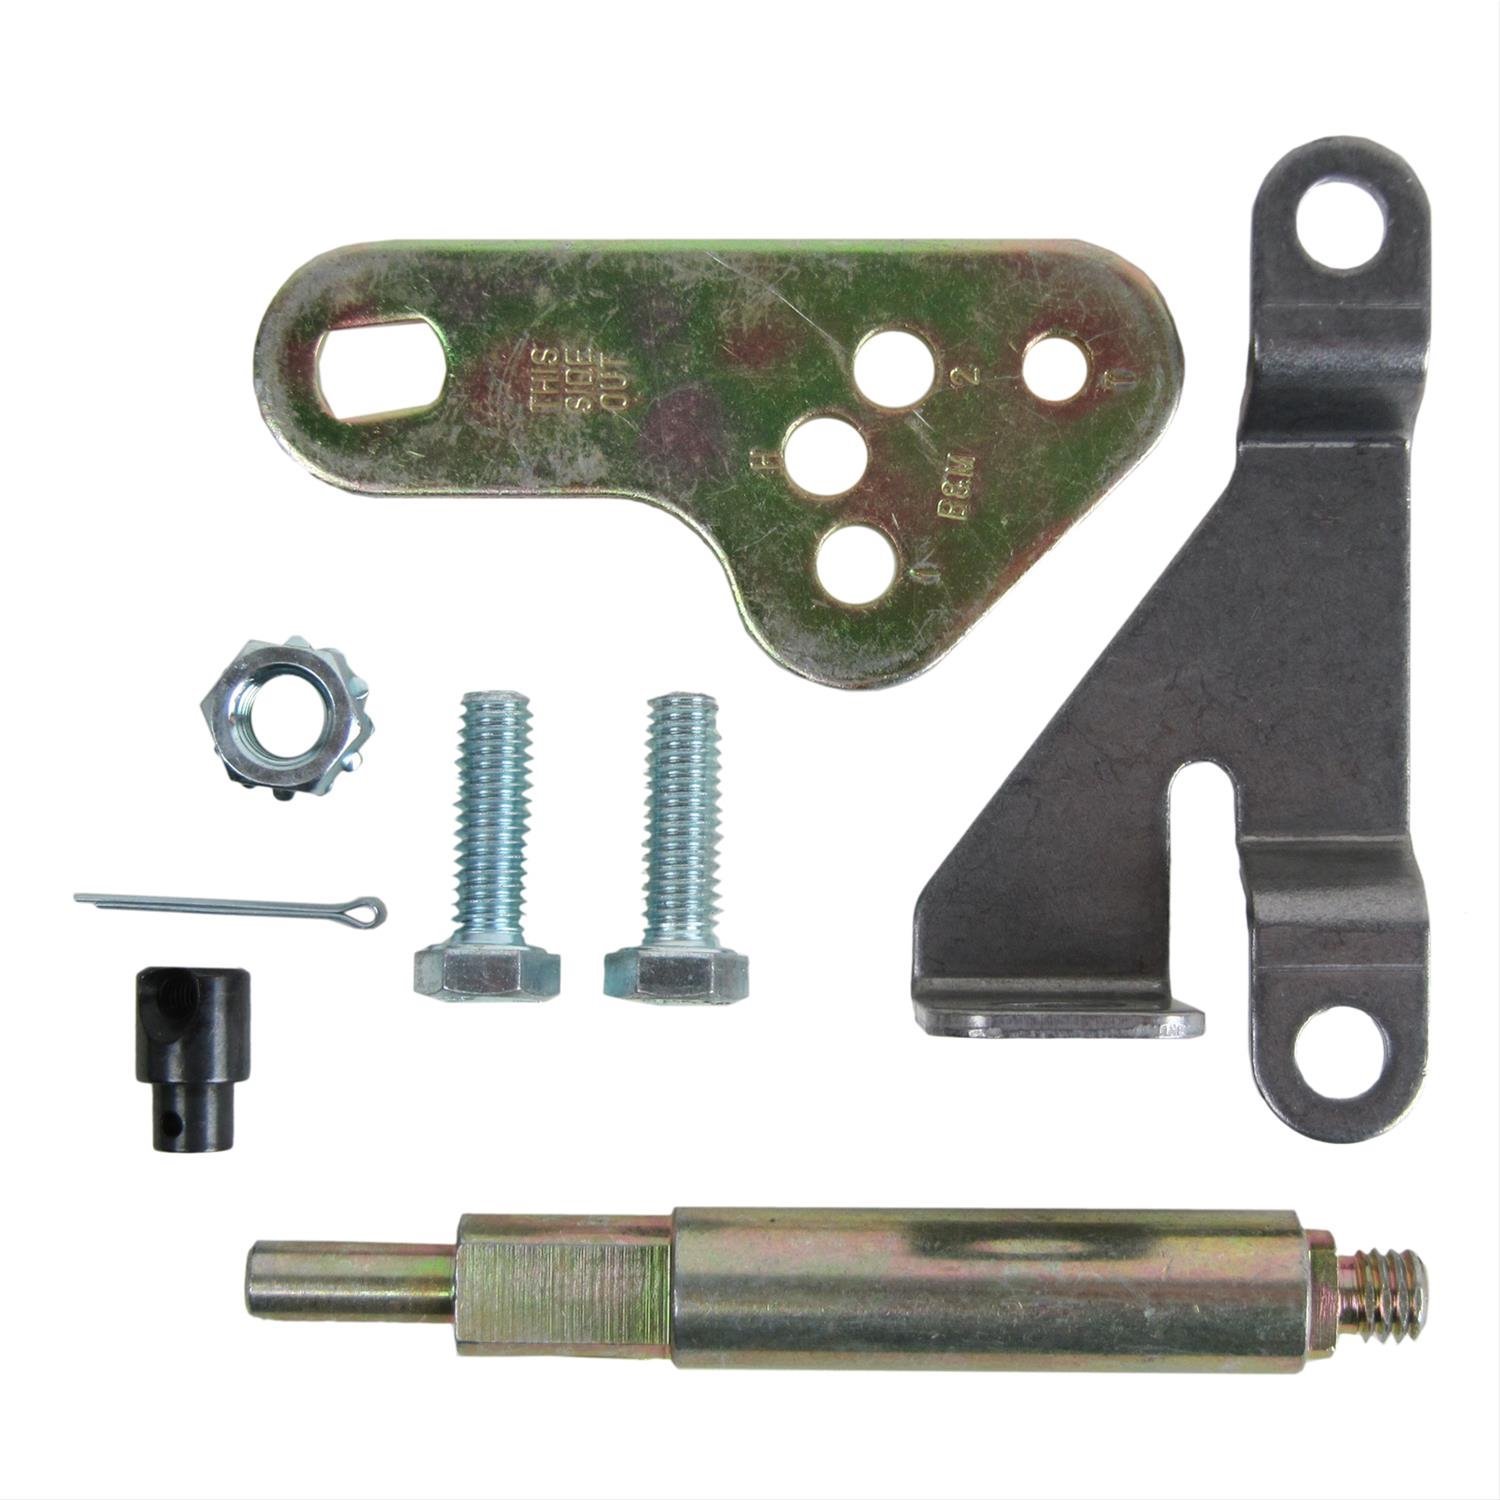 Automatic Shifter Bracket and Lever Kit 1962-1973 GM Powerglide Transmissions with PRNDL Switch